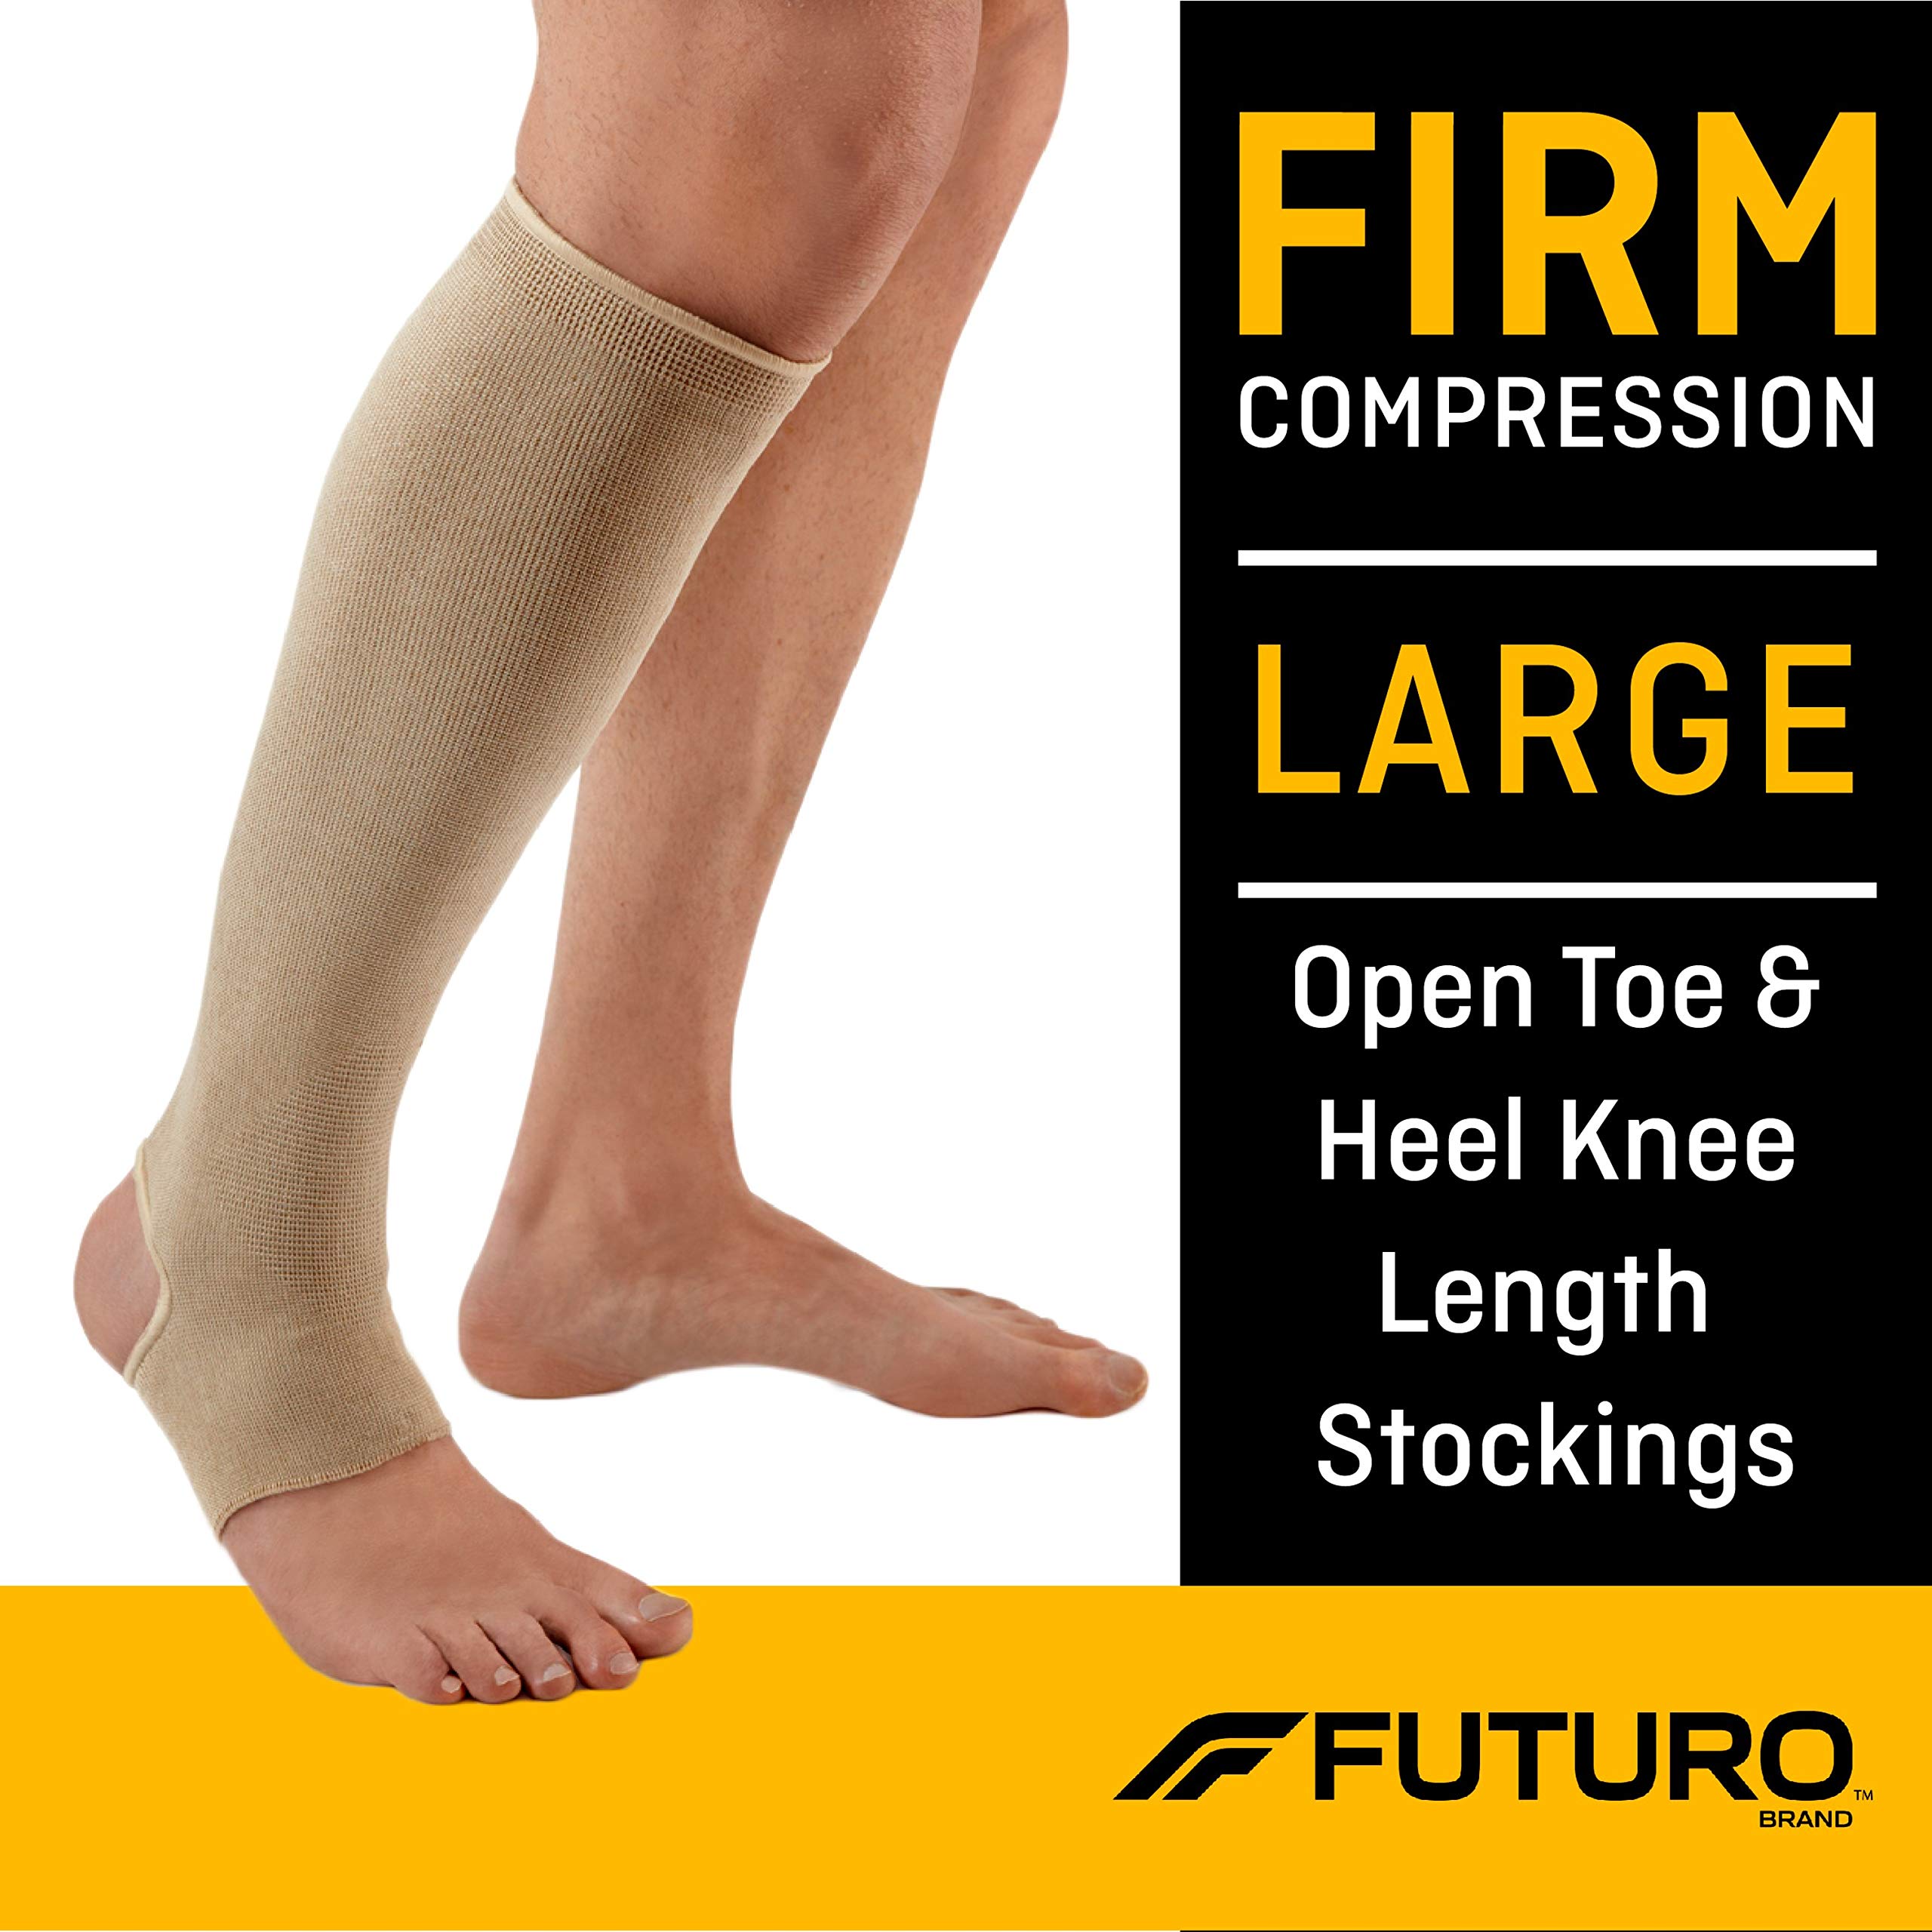 Futuro - MMM-414 Therapeutic Knee Length Stocking for Men/Women, Helps Relieve Symptoms of Mild Spider Veins, Firm Compression, Open Toe/Heel, Large, Beige, 1 Count